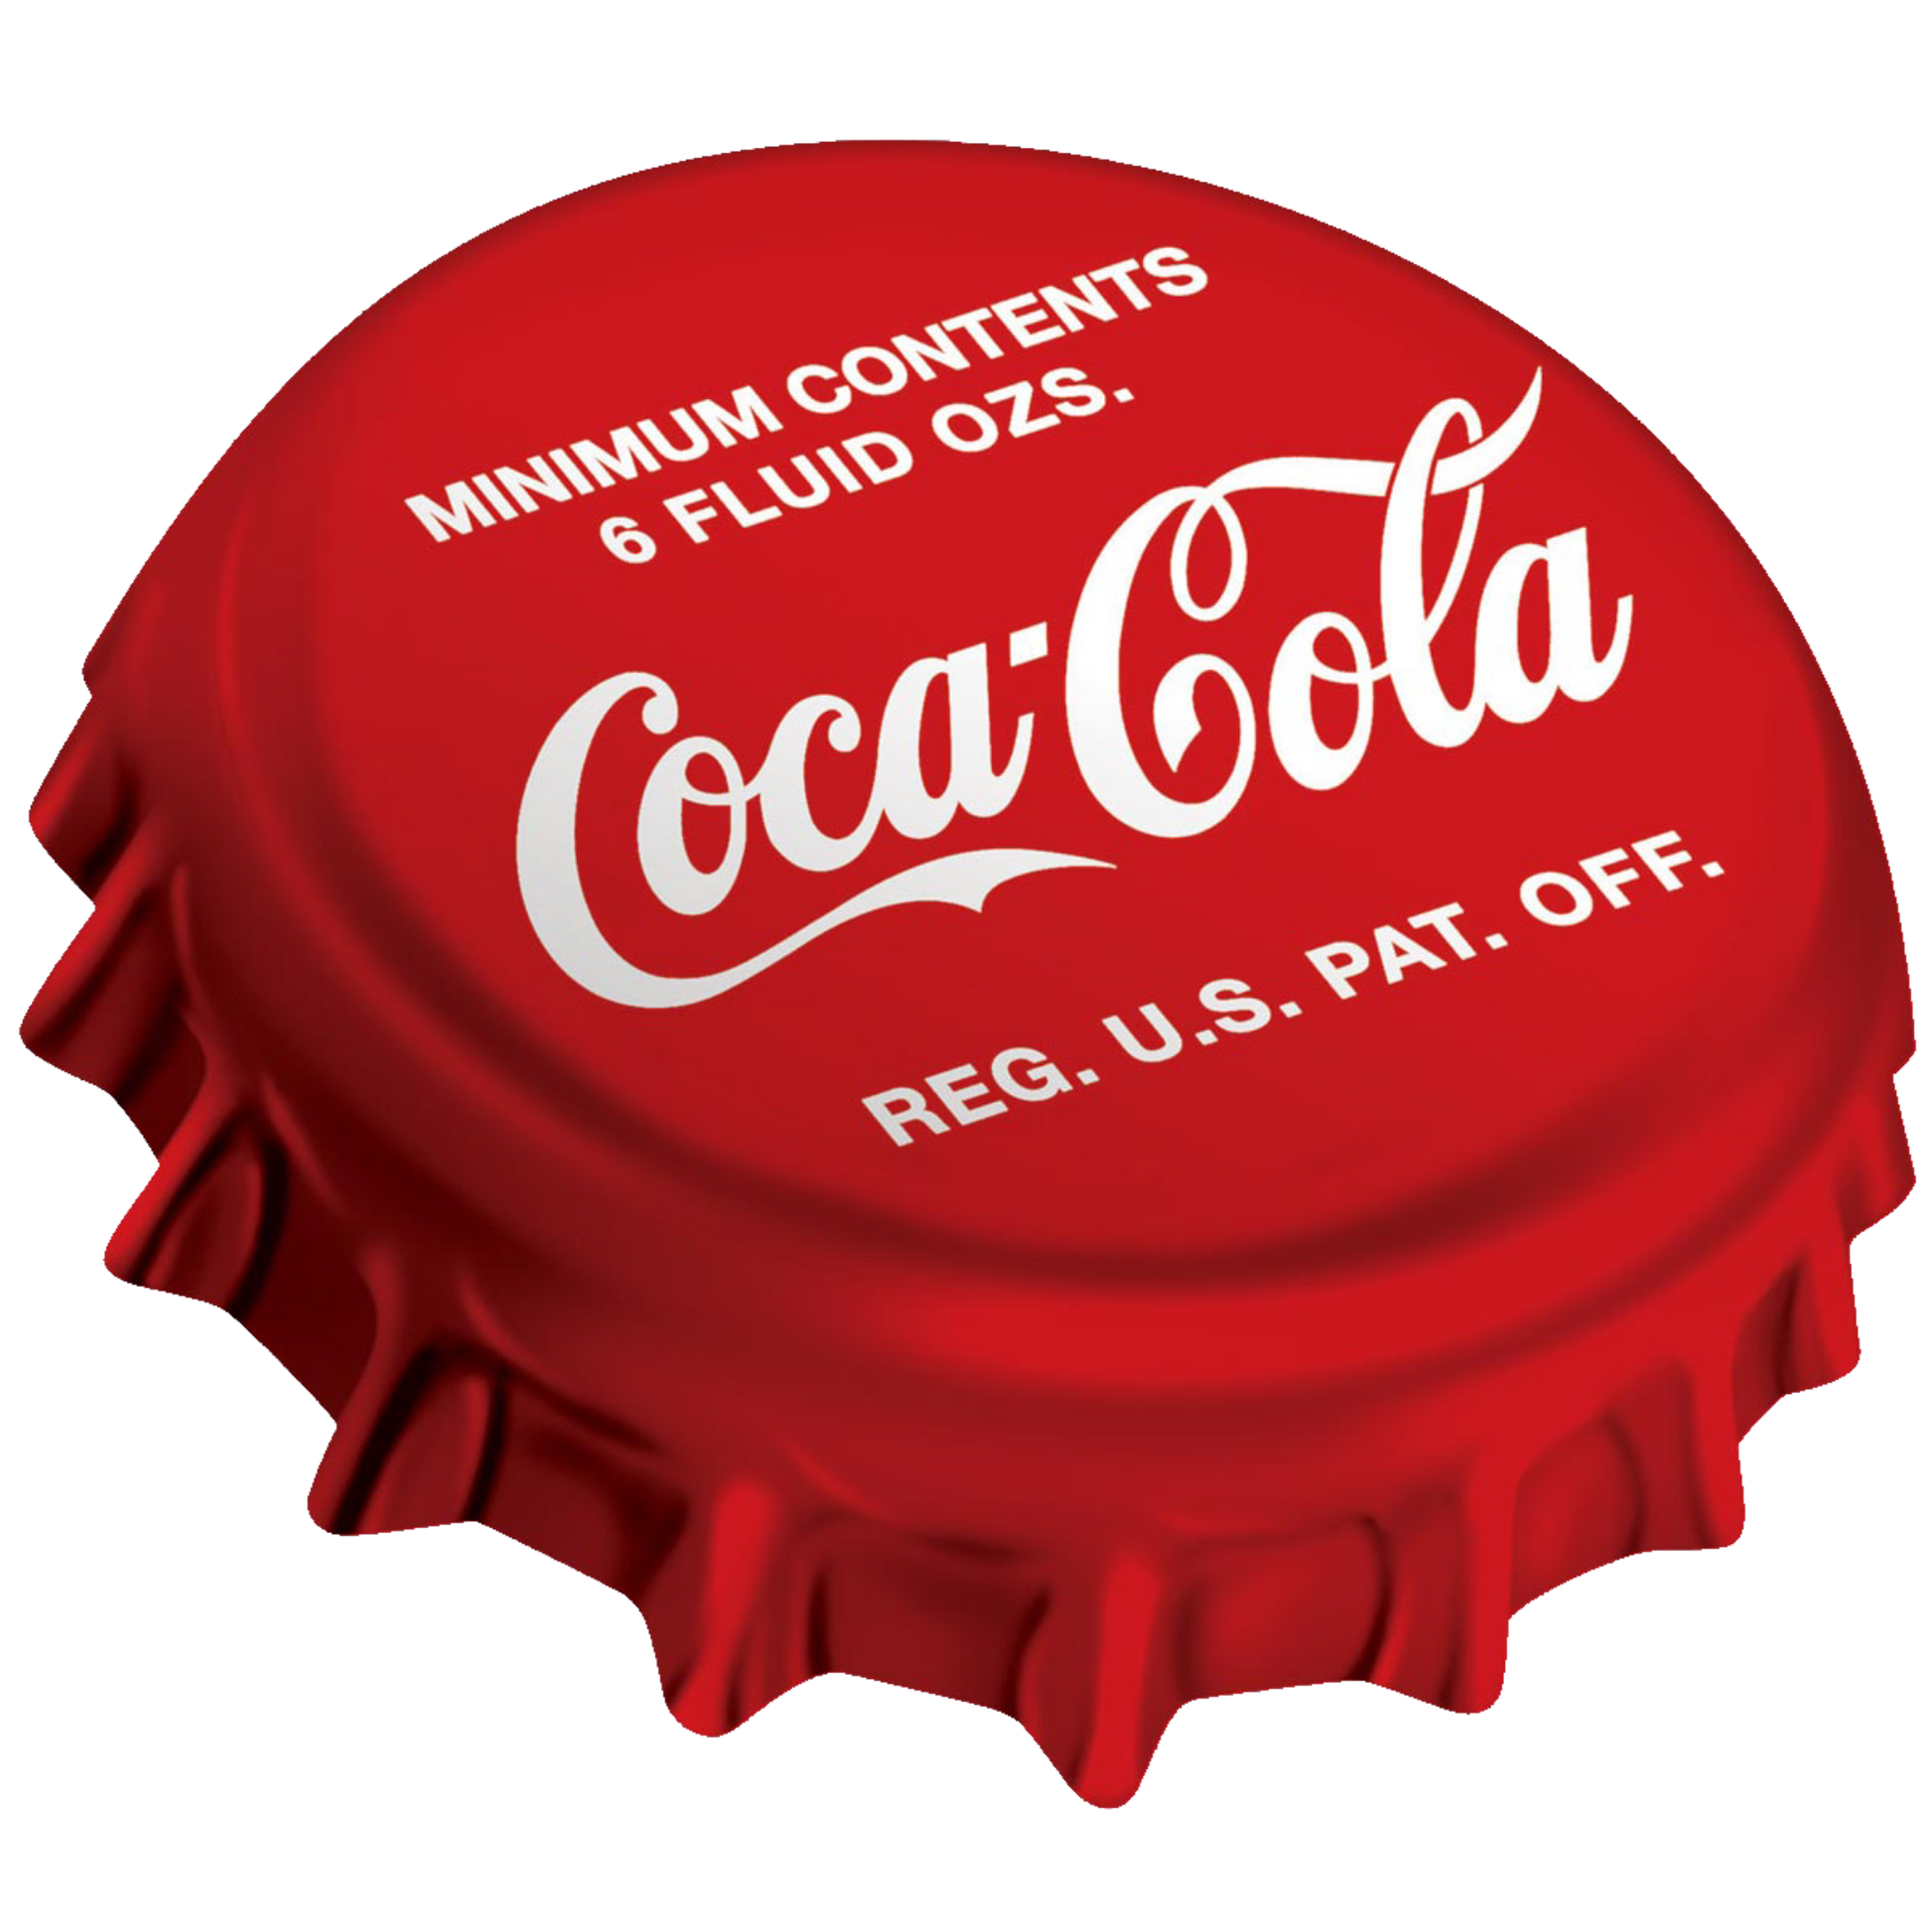 Vintage-inspired Coca-Cola bottle cap tin sign in bright red with classic white lettering.